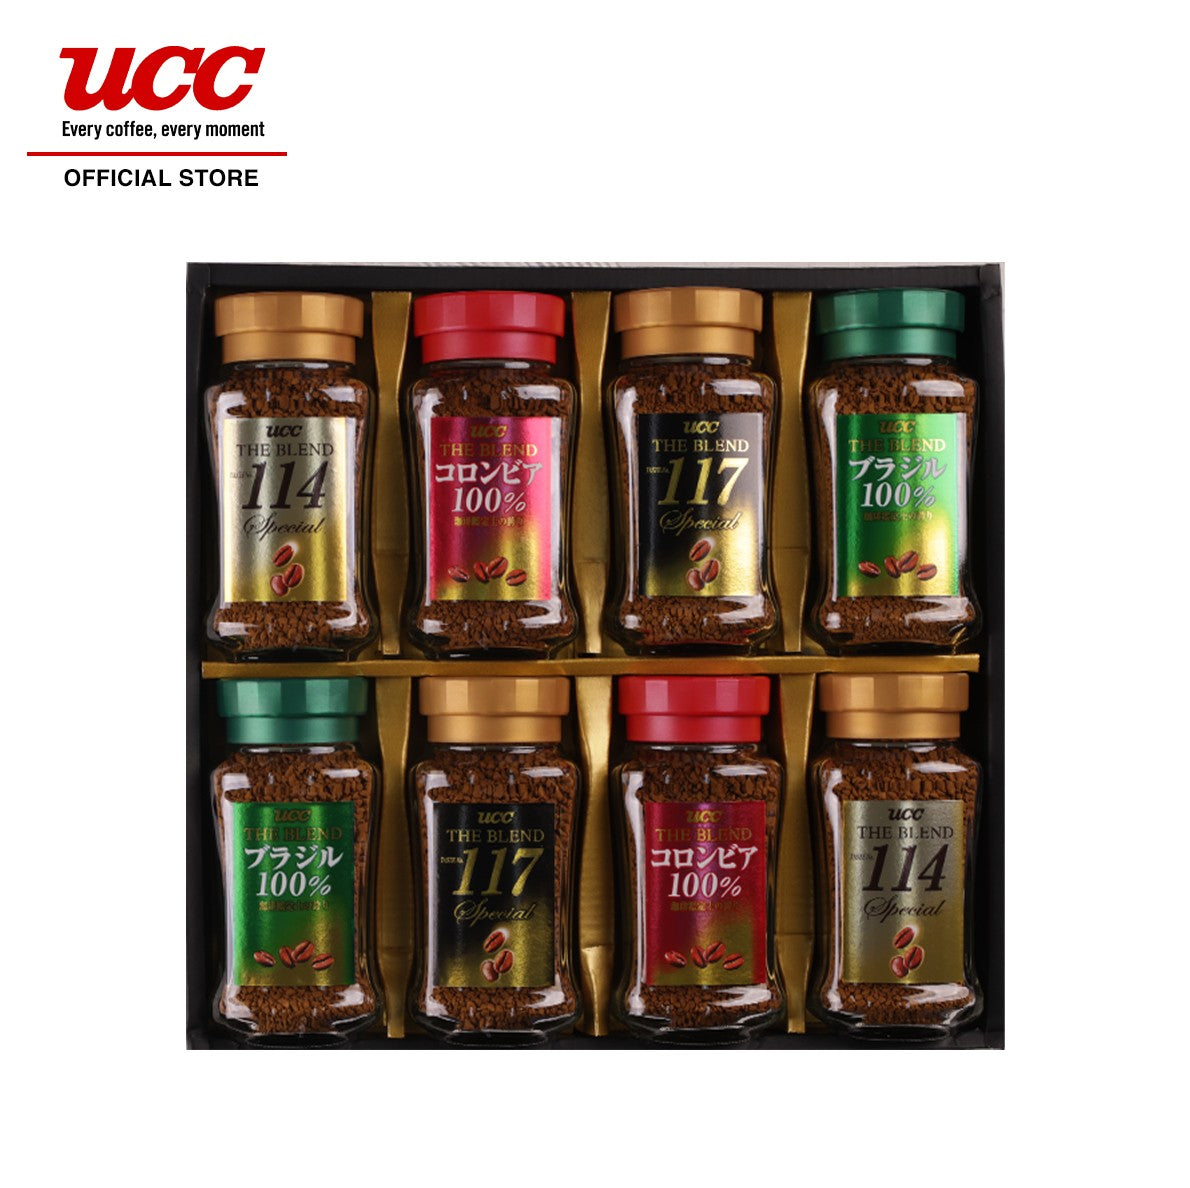 UCC The Blend Instant Coffee Gift Set YIC-50